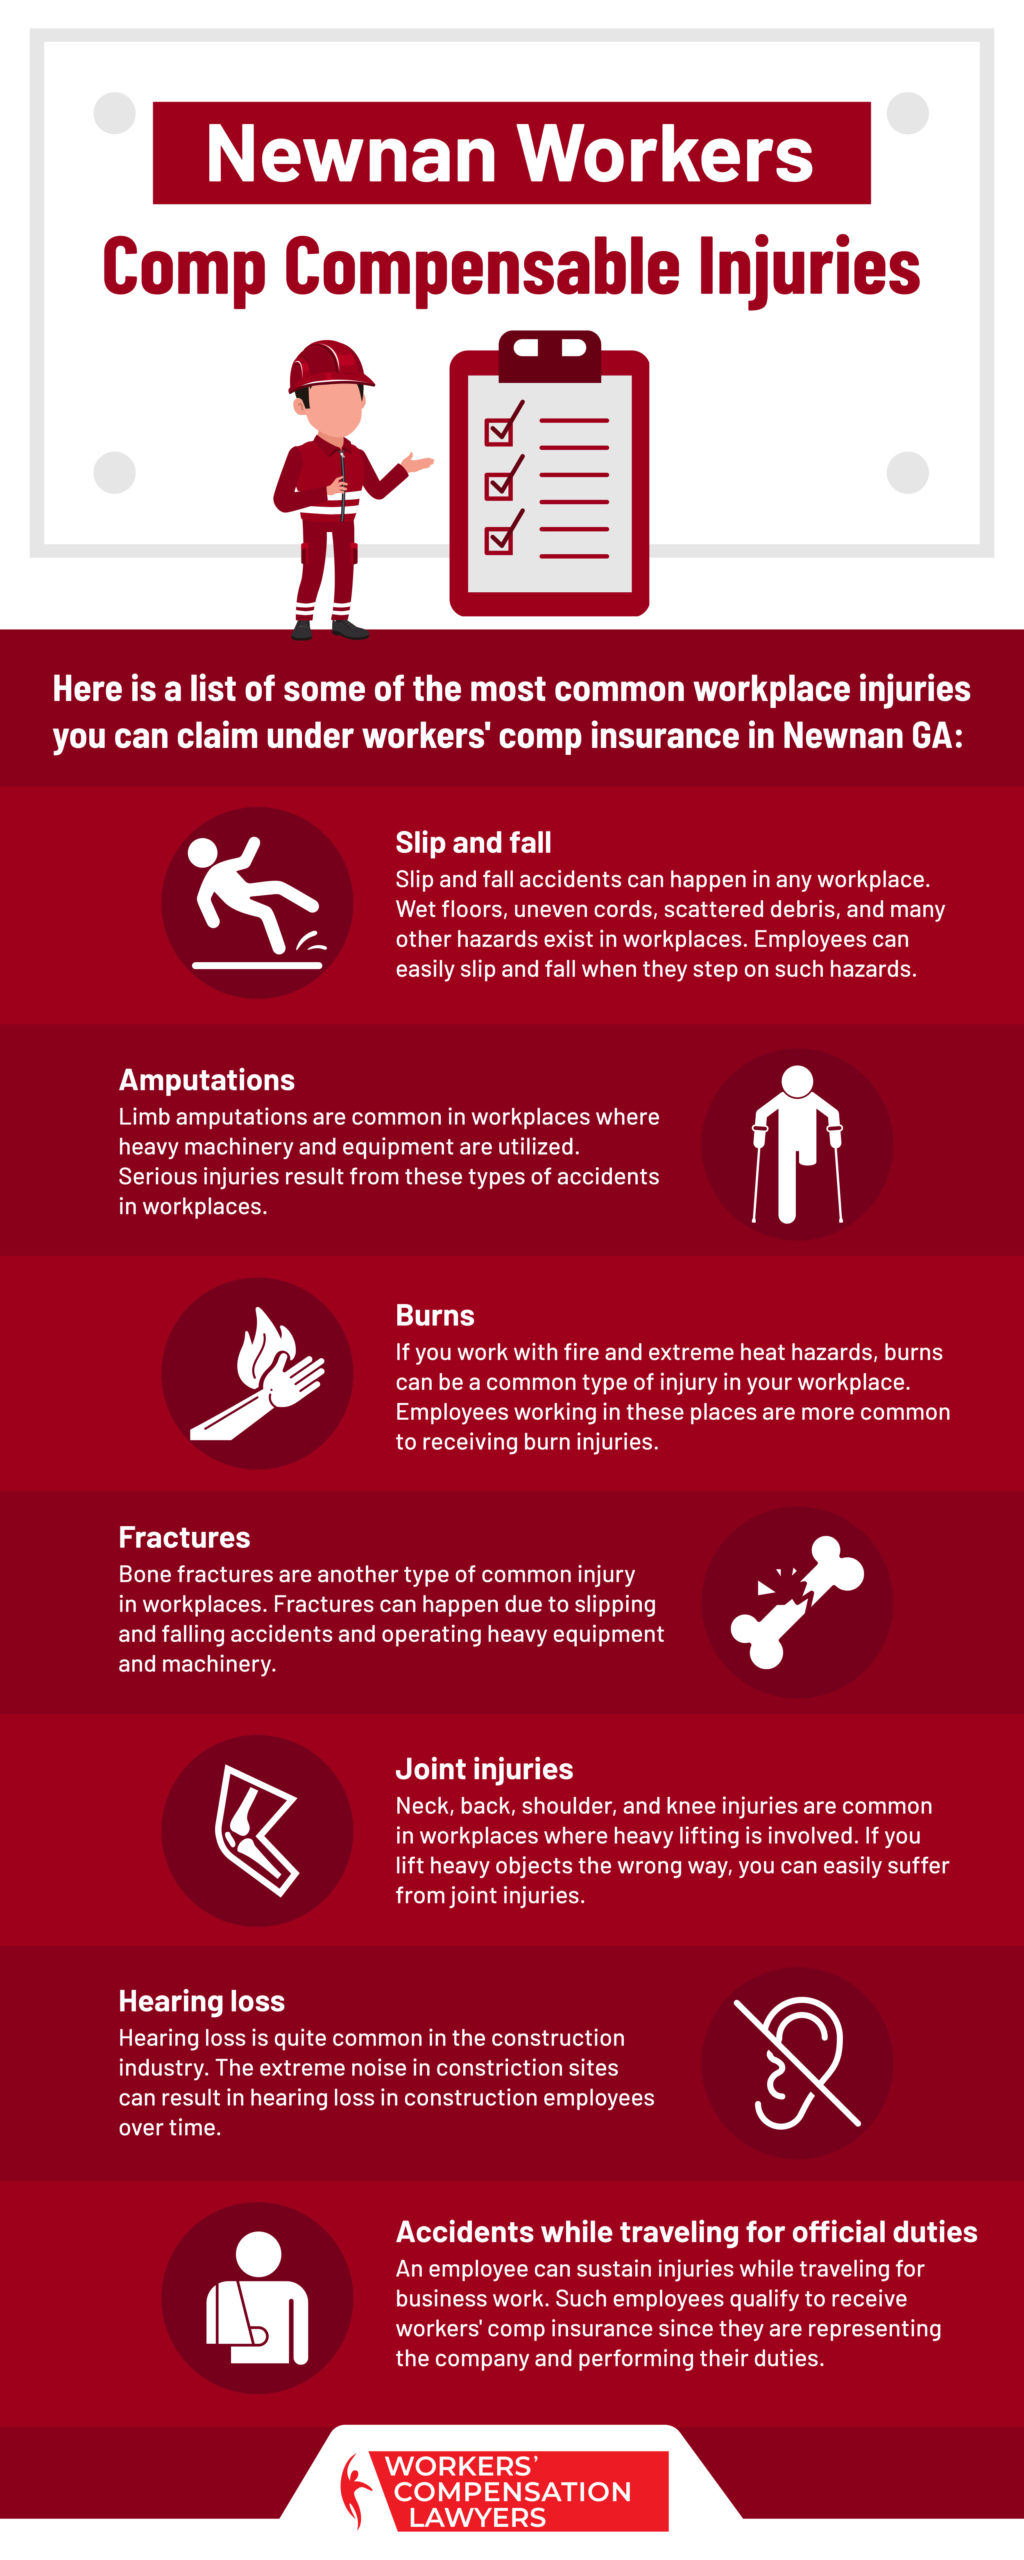 Newnan Workers Compensation Compensable Injury Infographic